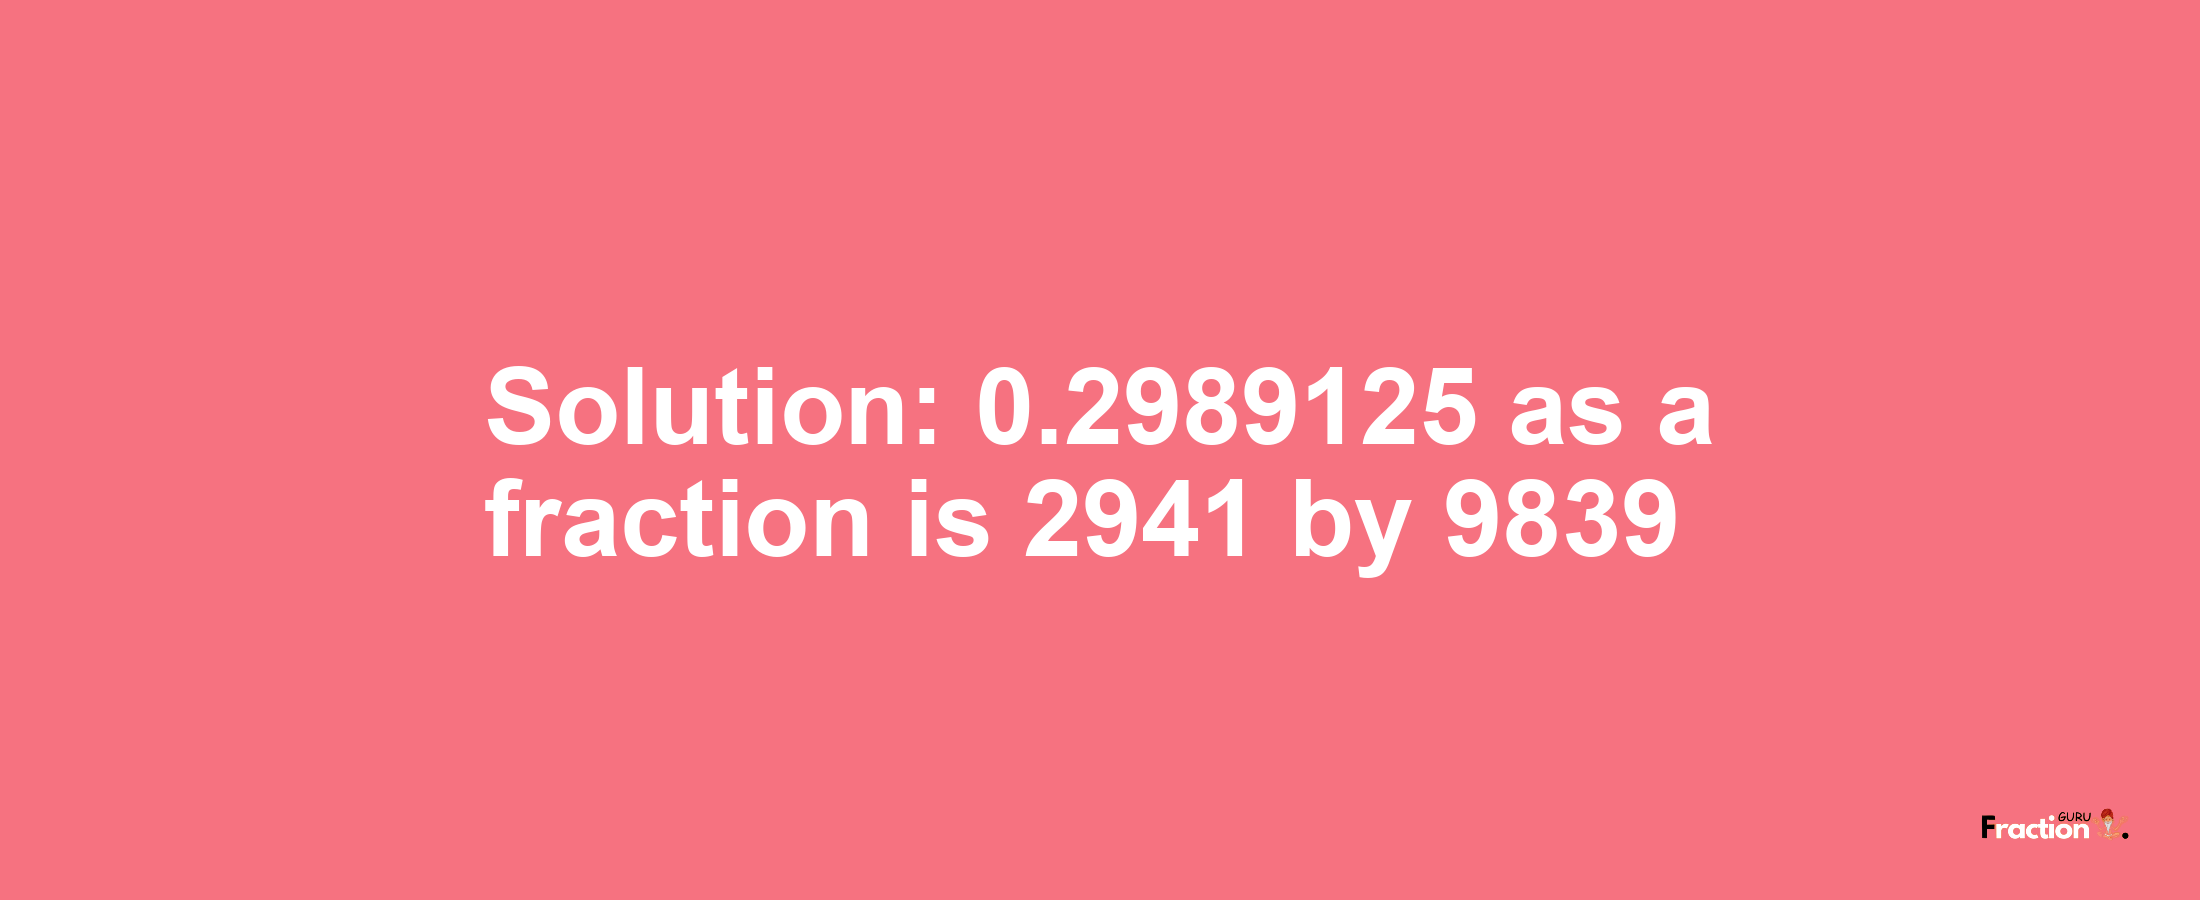 Solution:0.2989125 as a fraction is 2941/9839